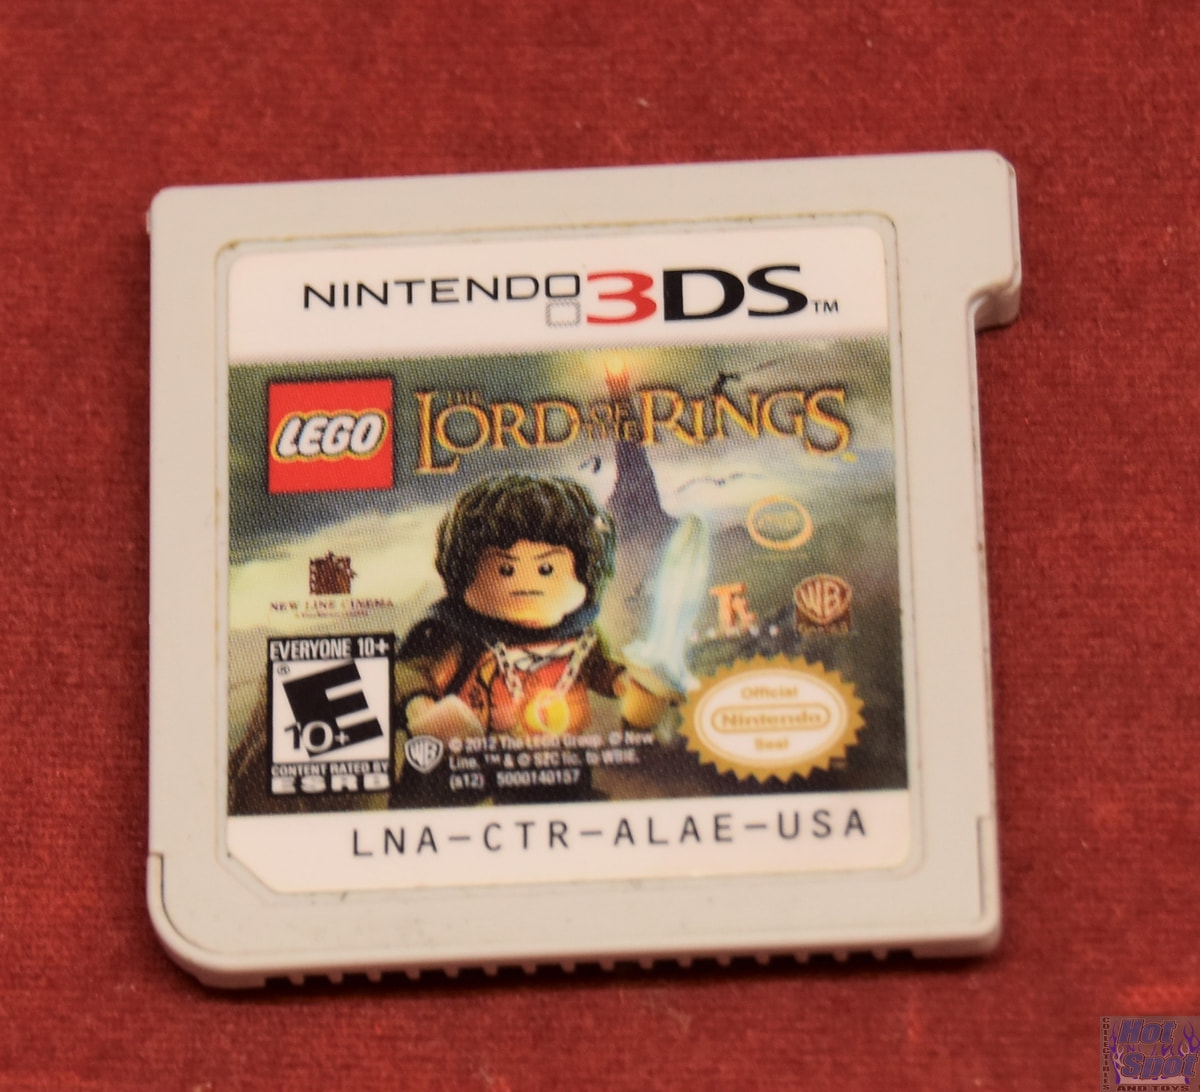 Hot Spot Collectibles and Toys - LEGO Lord of the Rings 3DS